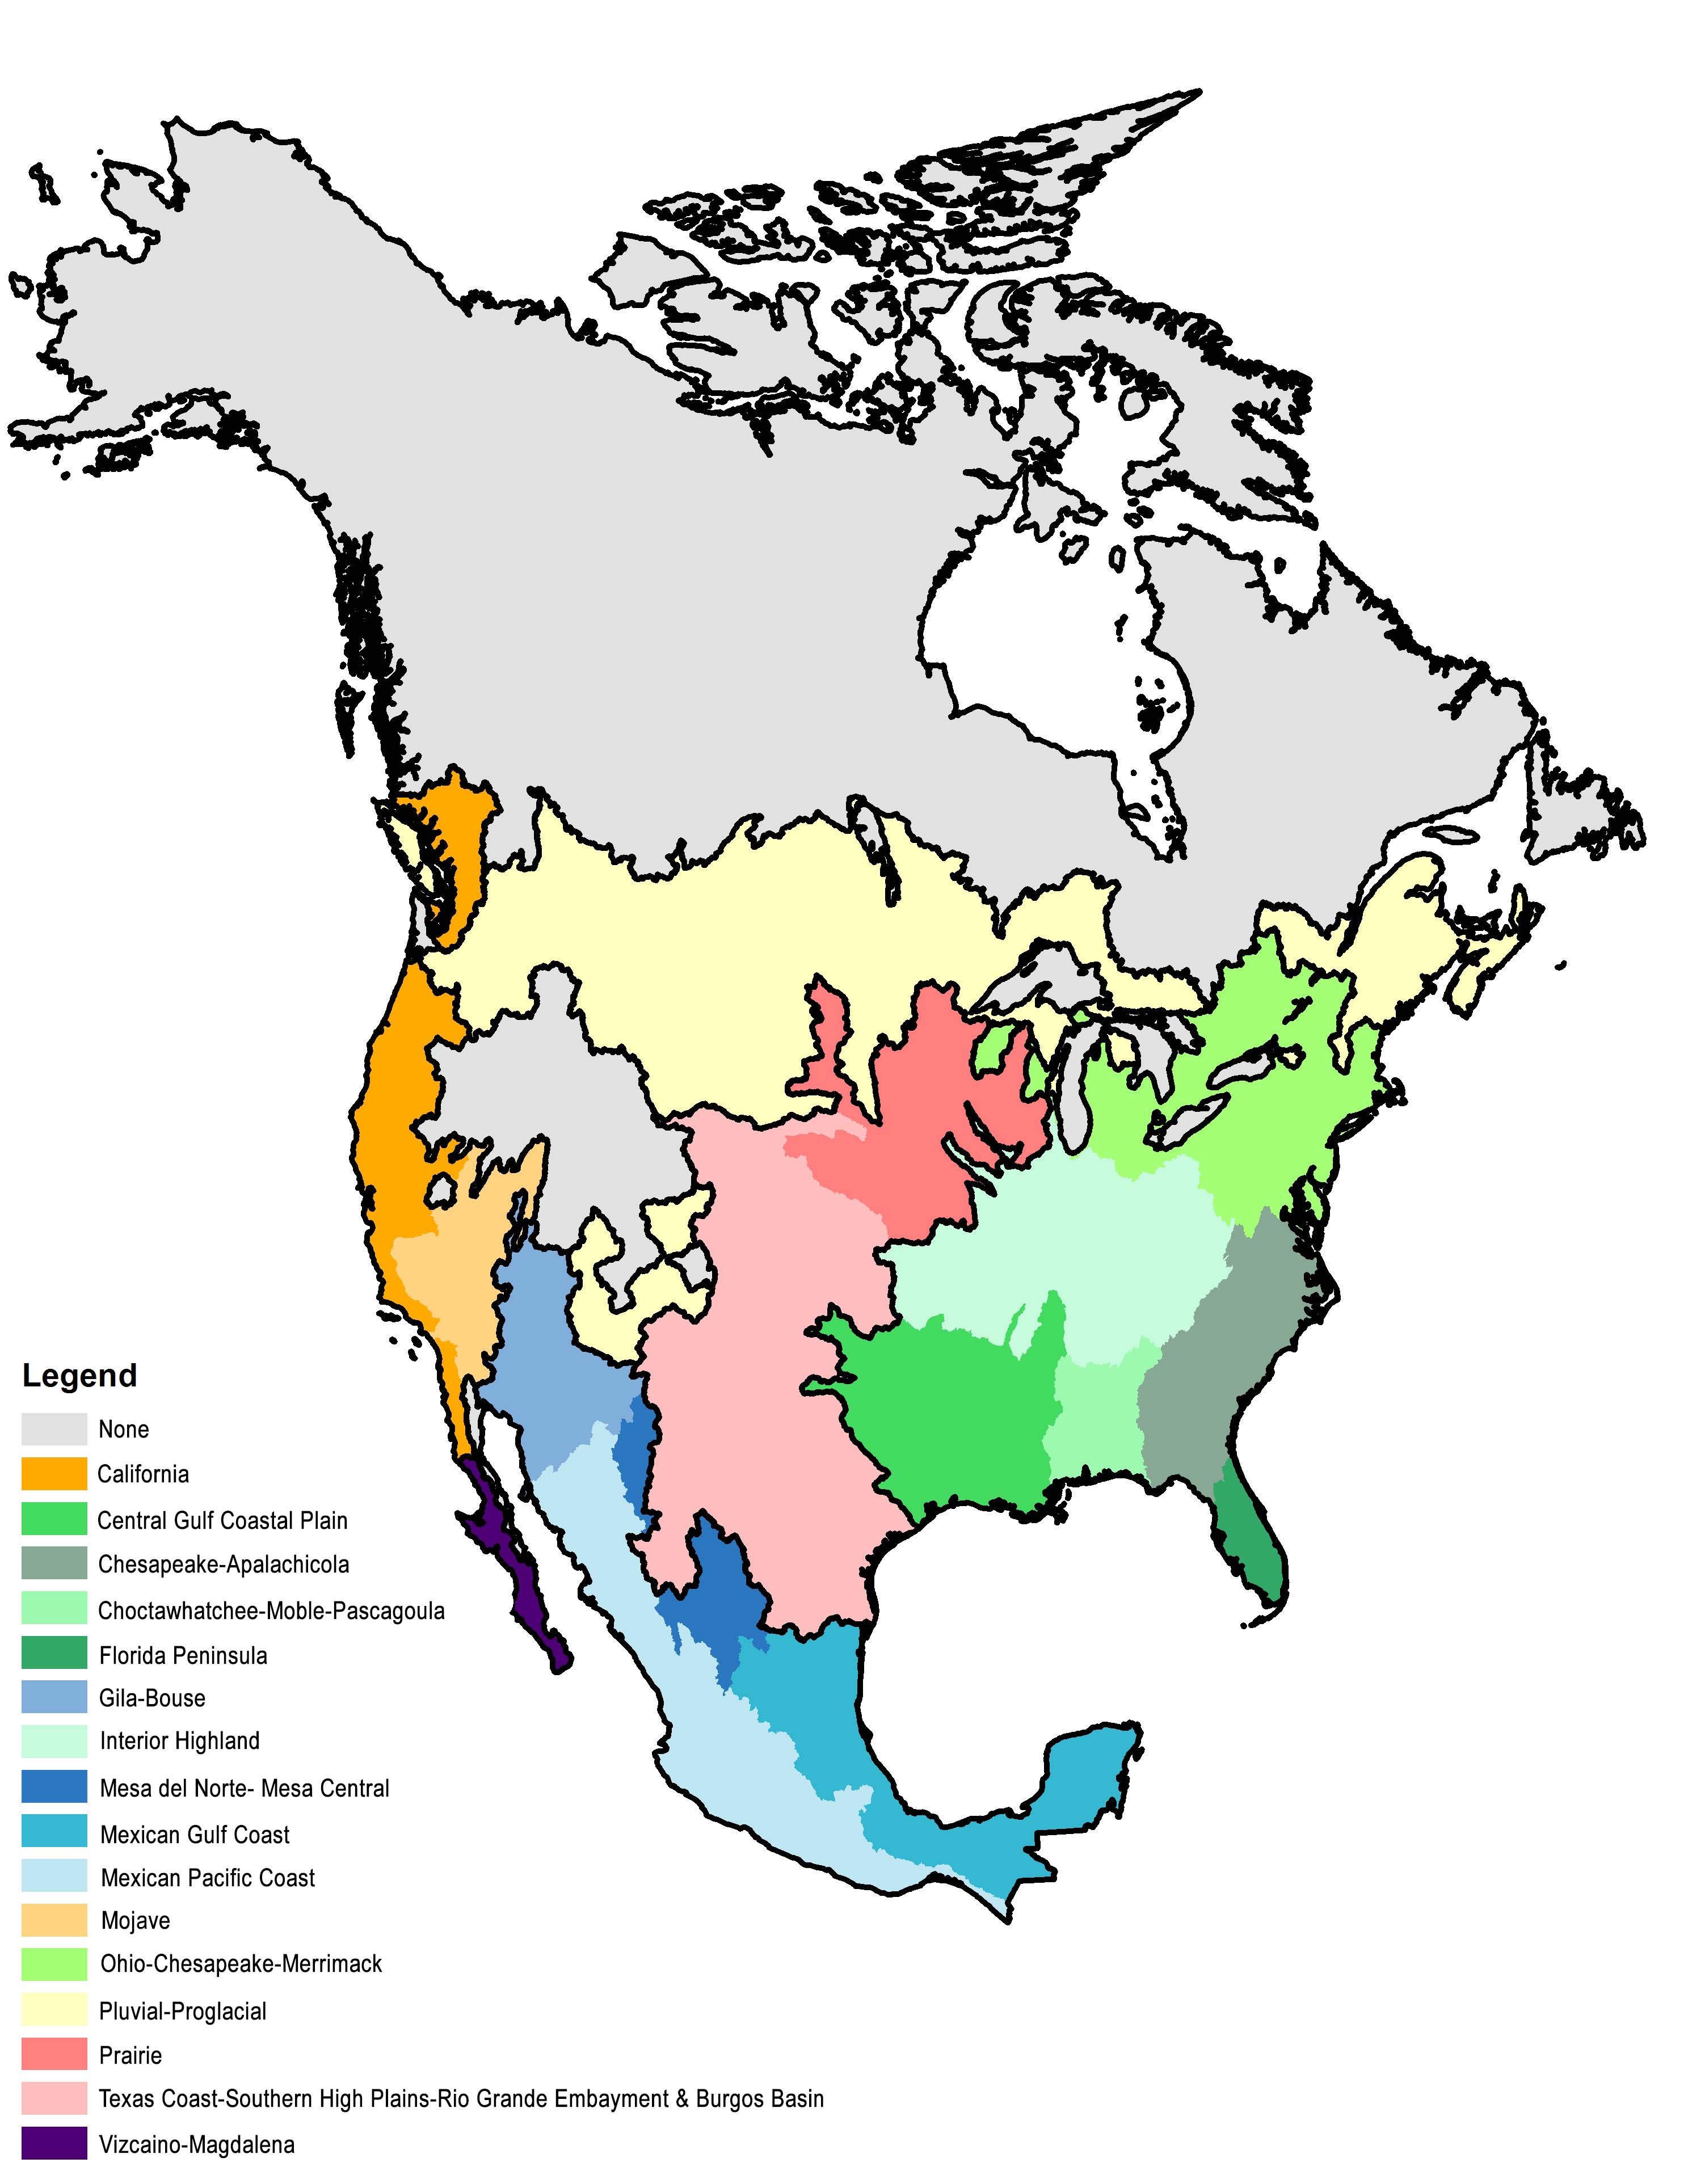 A new map of U.S. Turtle Provinces